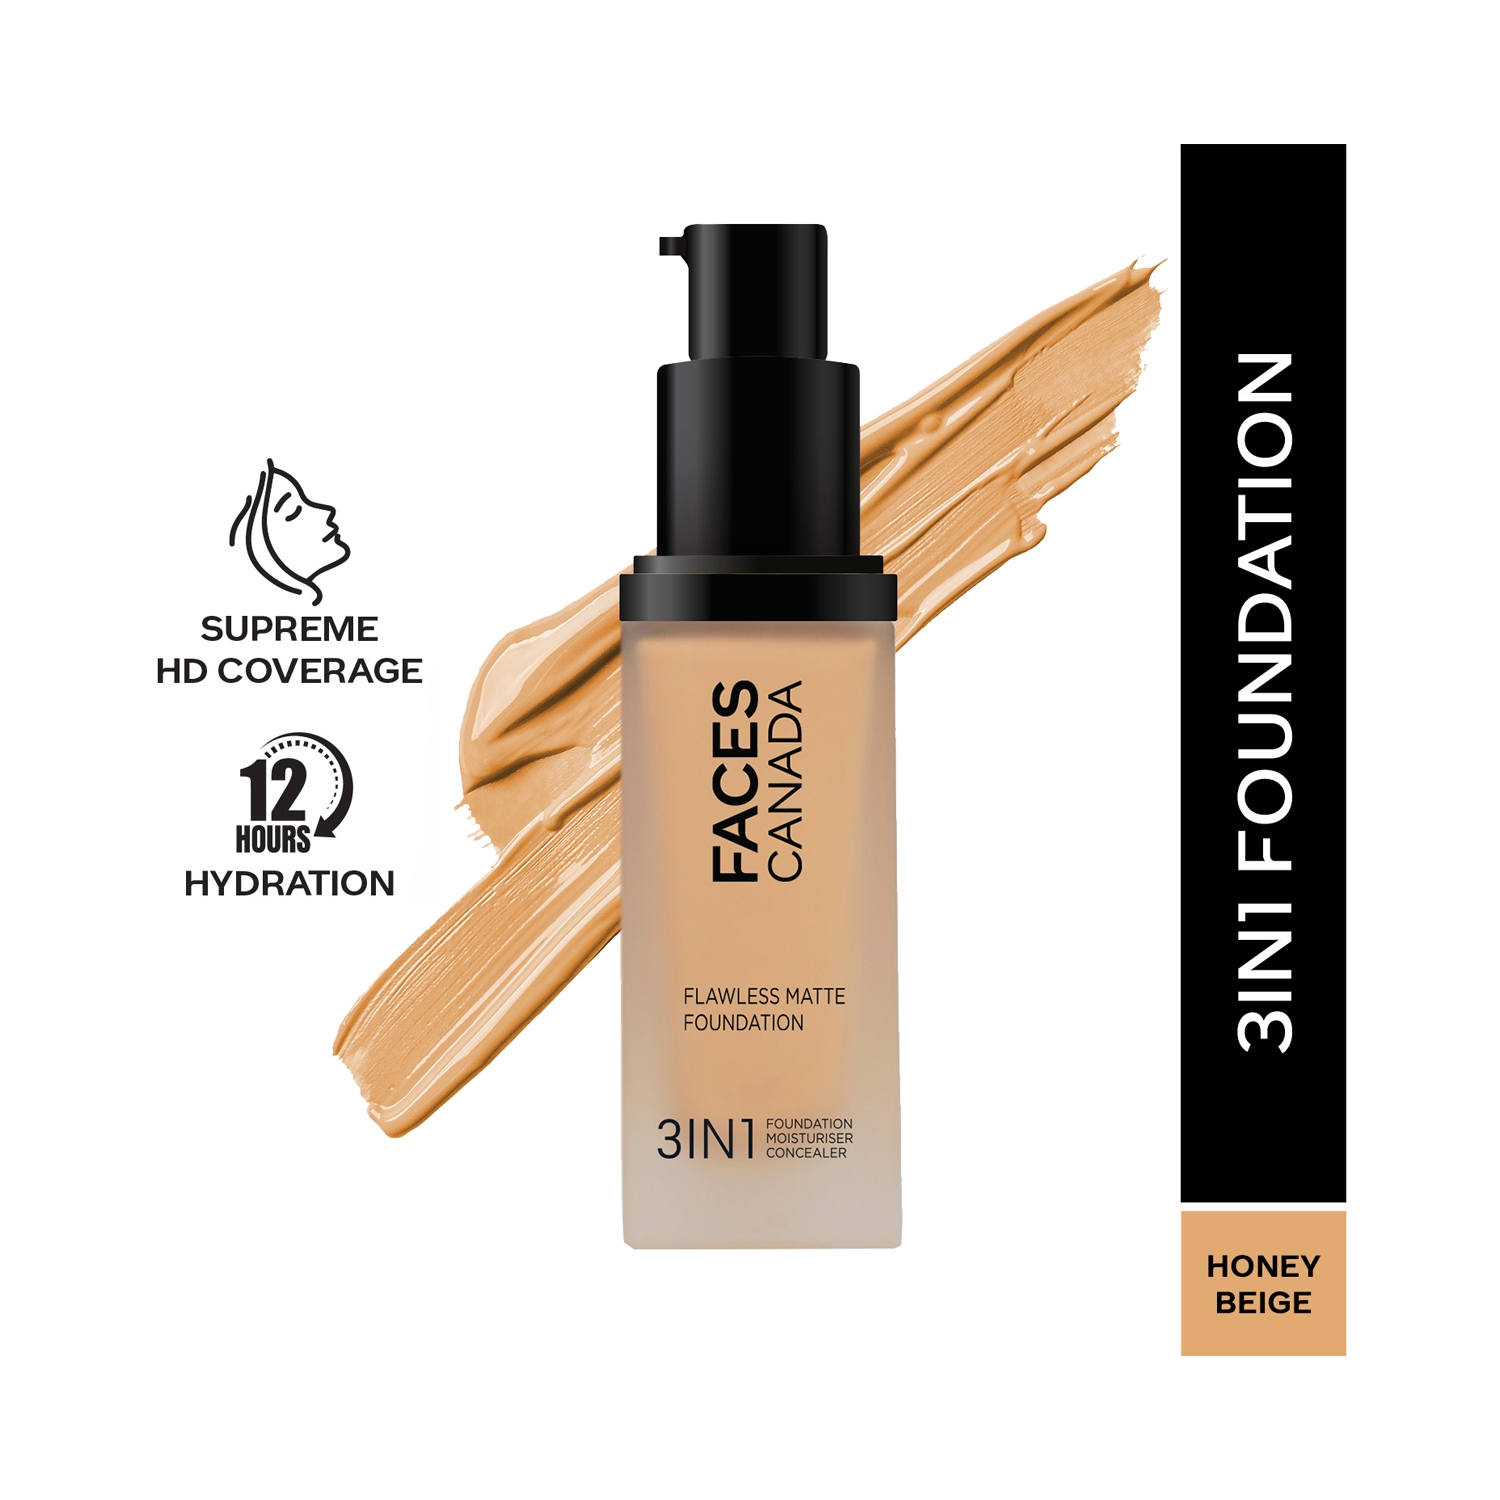 Faces Canada | Faces Canada 3-In-1 Flawless Matte Foundation SPF 18 - 031 Honey Beige (30ml)